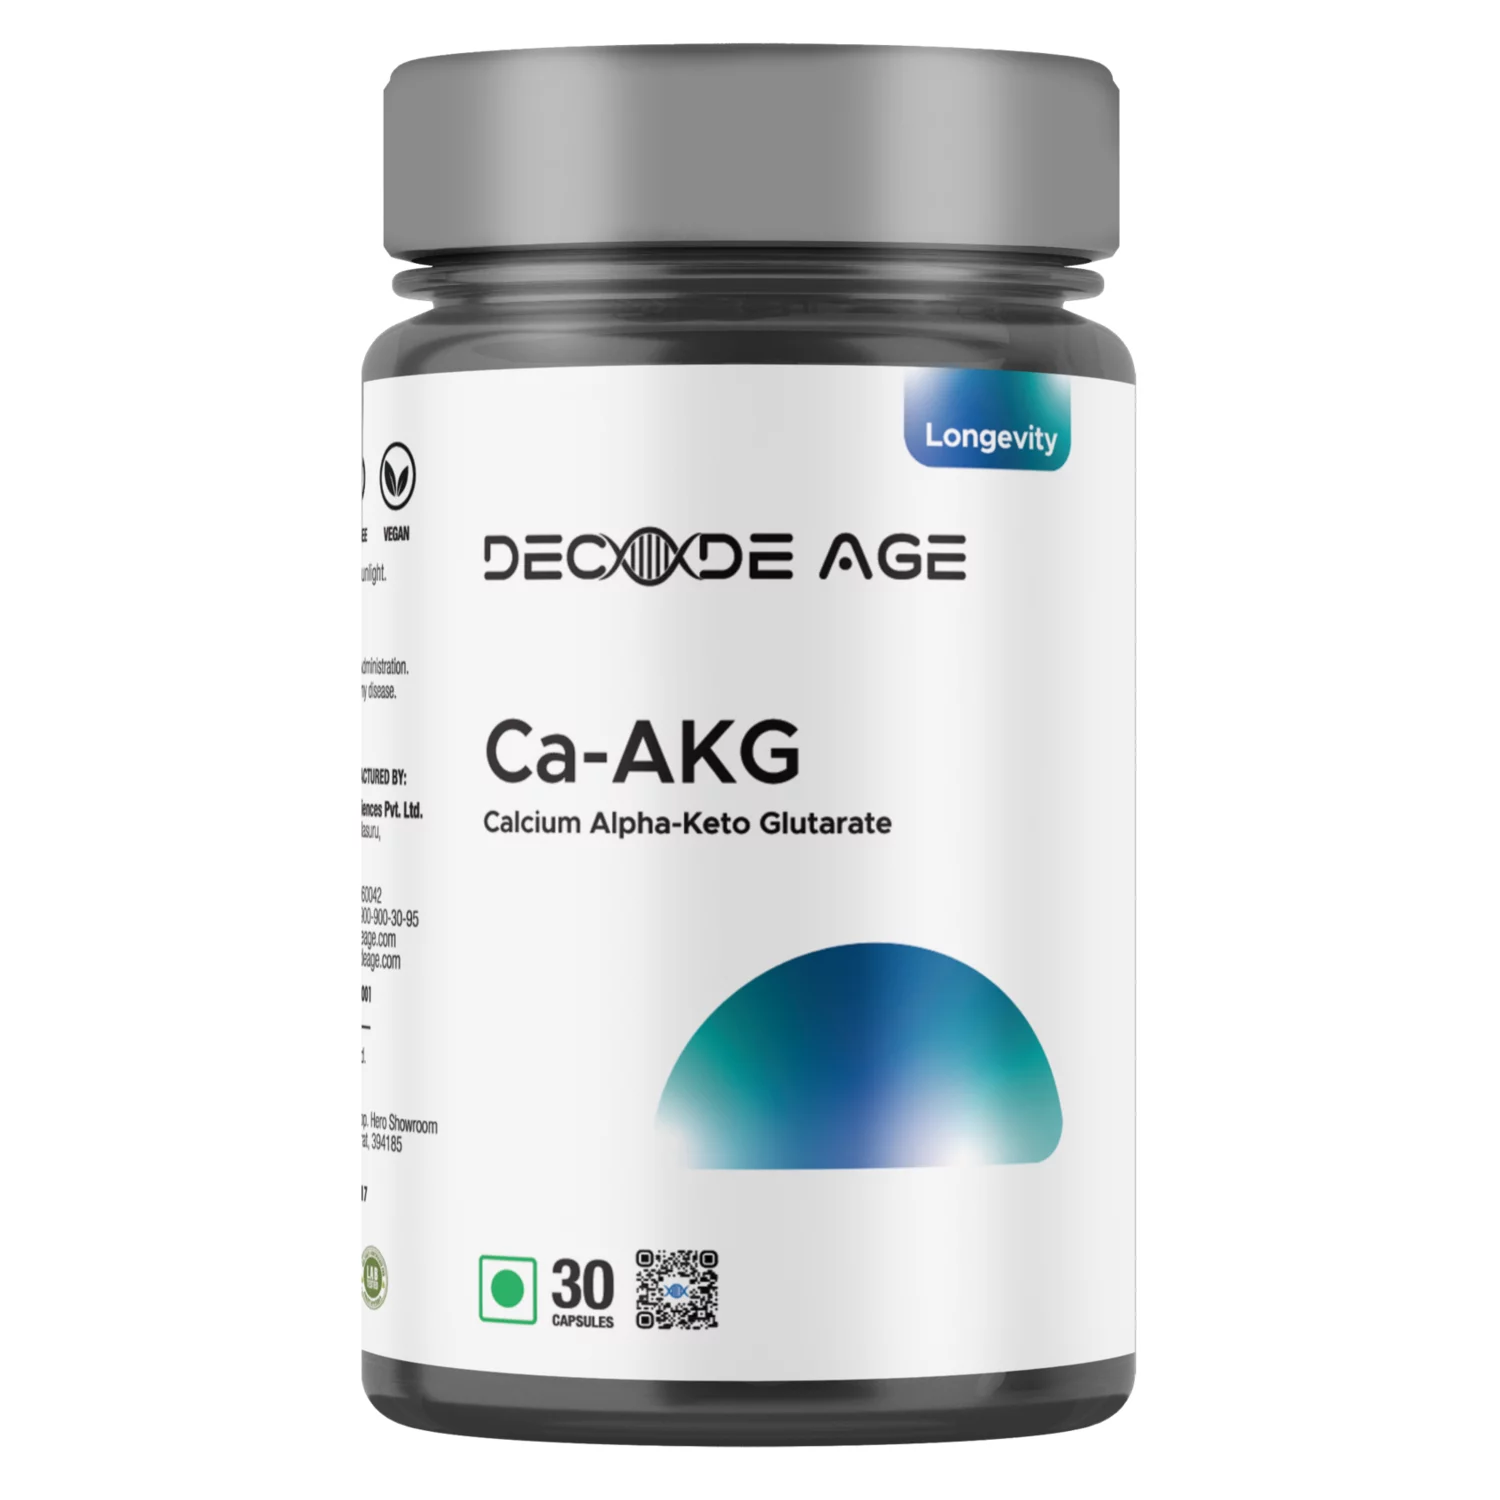 Decode Age Ca AKG + Alpha Ketoglutarate Improves Muscle Recovery (30 Capsules)